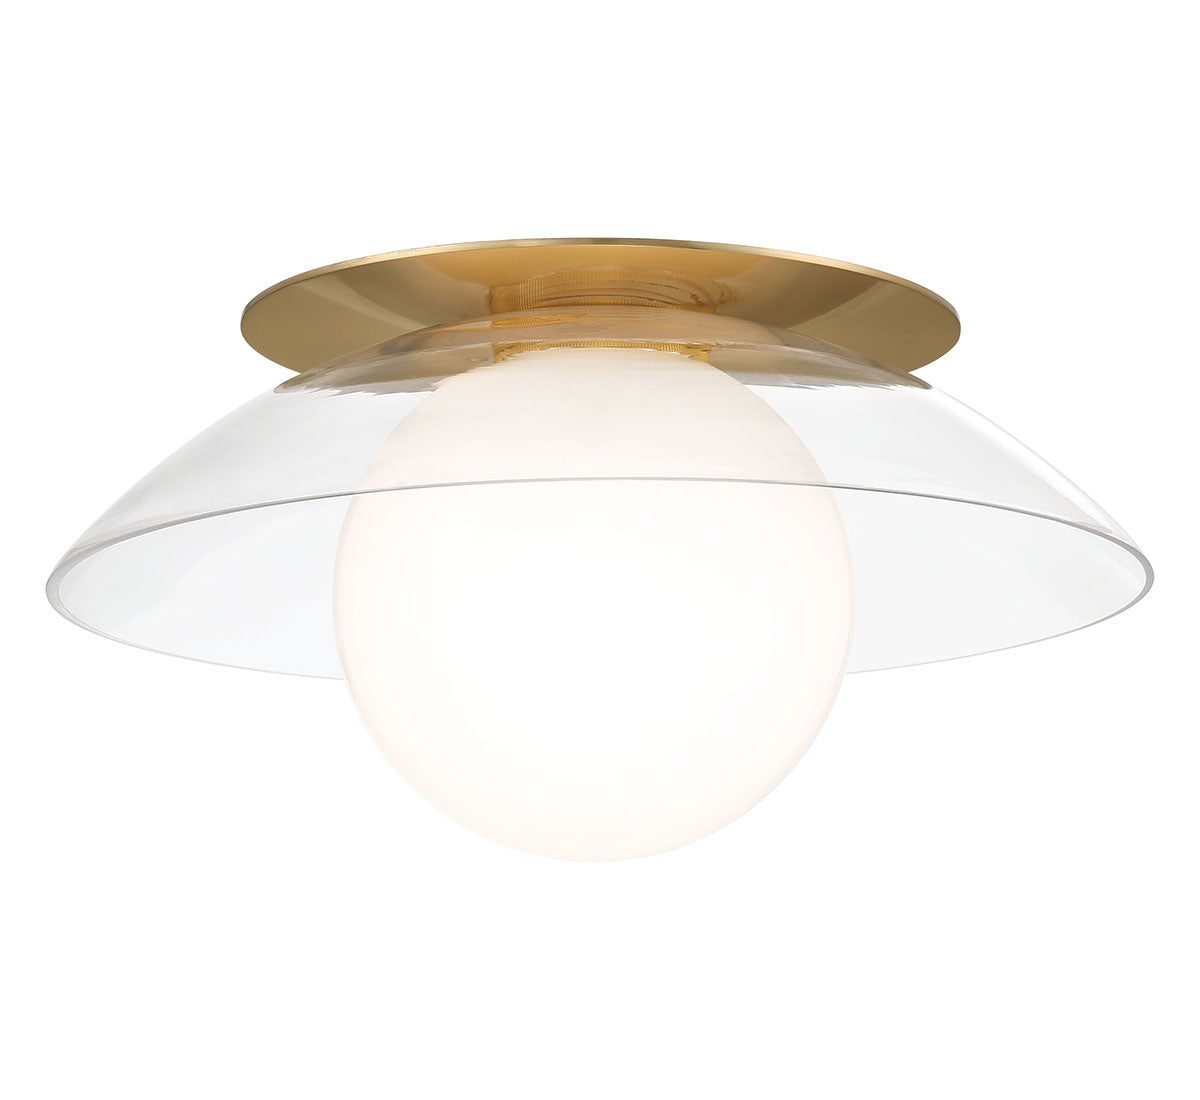 ANCONA 10124-06, Large 1 Light Ceiling/Wall Mount